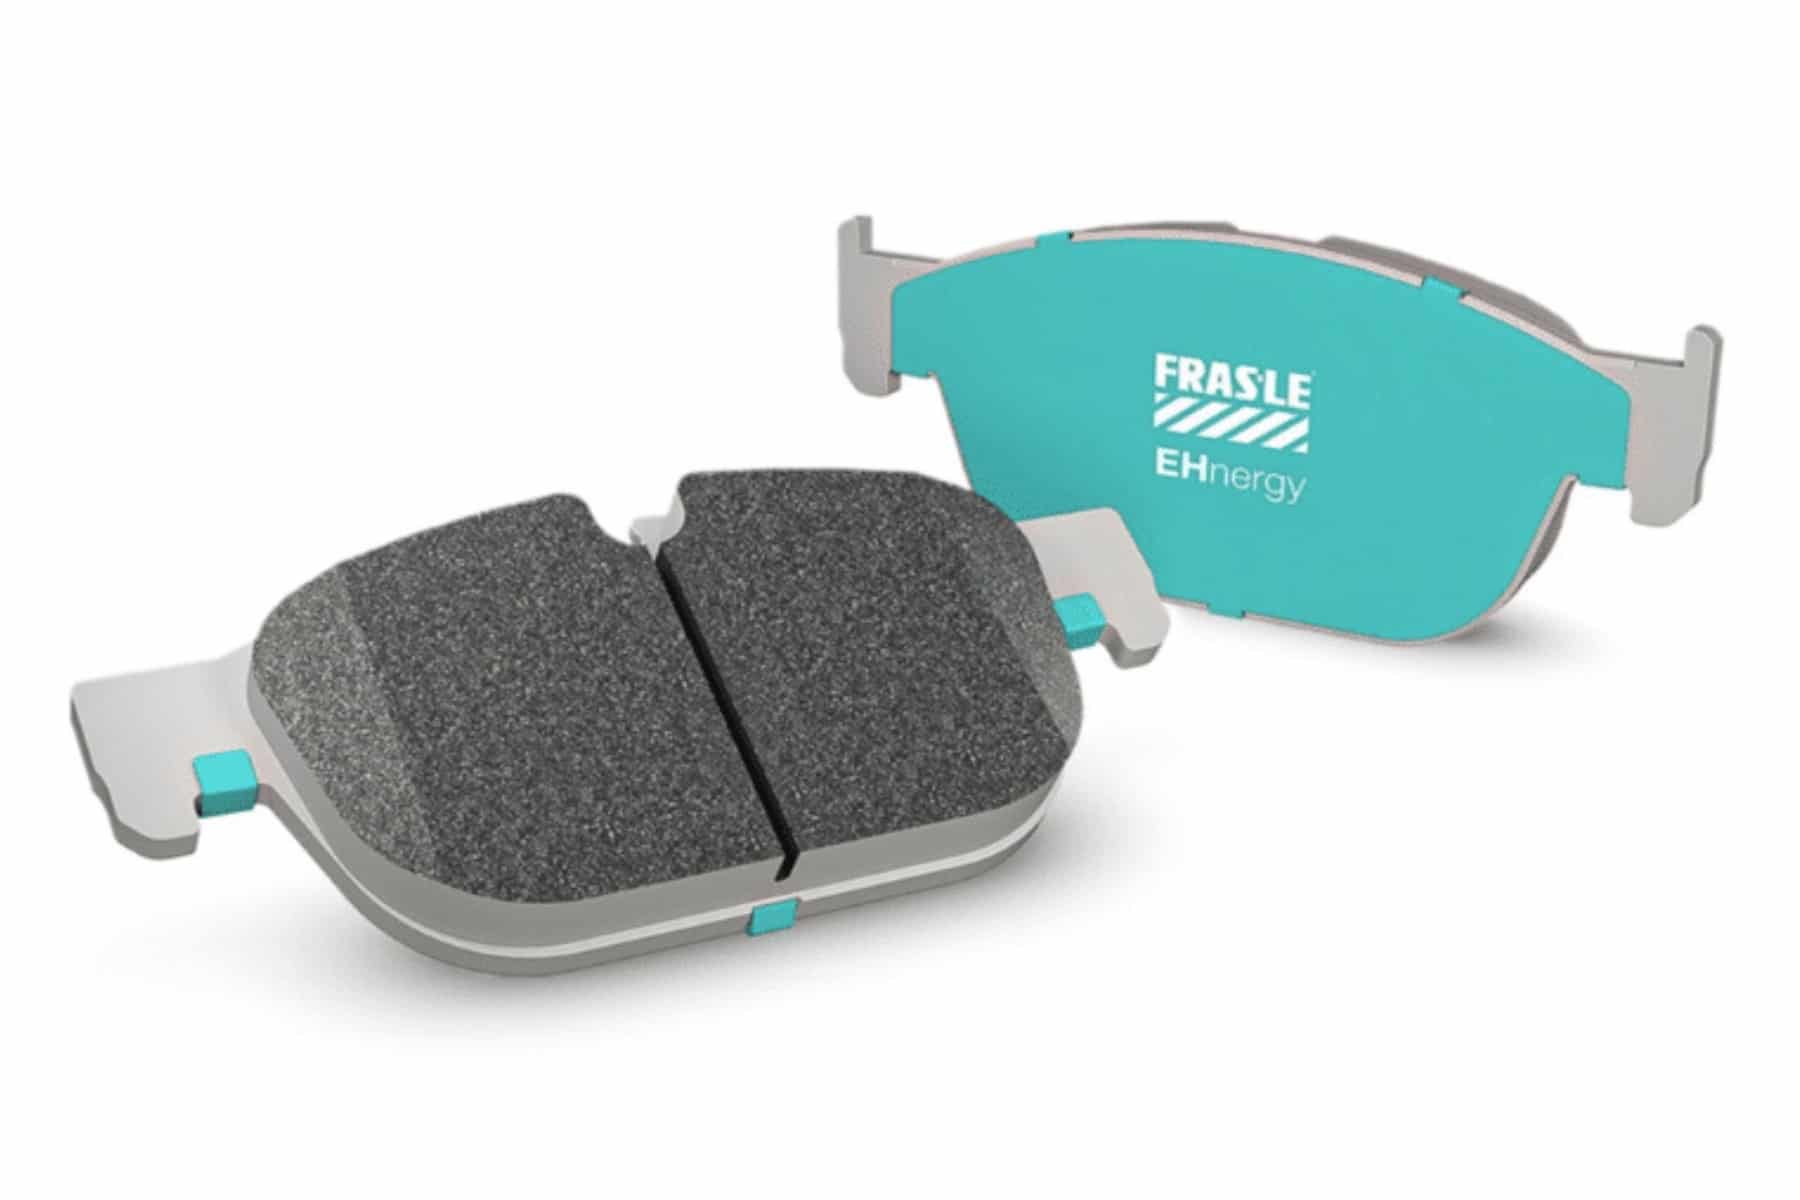 Fras-le will launch a line of Ehnergy brake pads for EVs and hybrids at Automec 2023